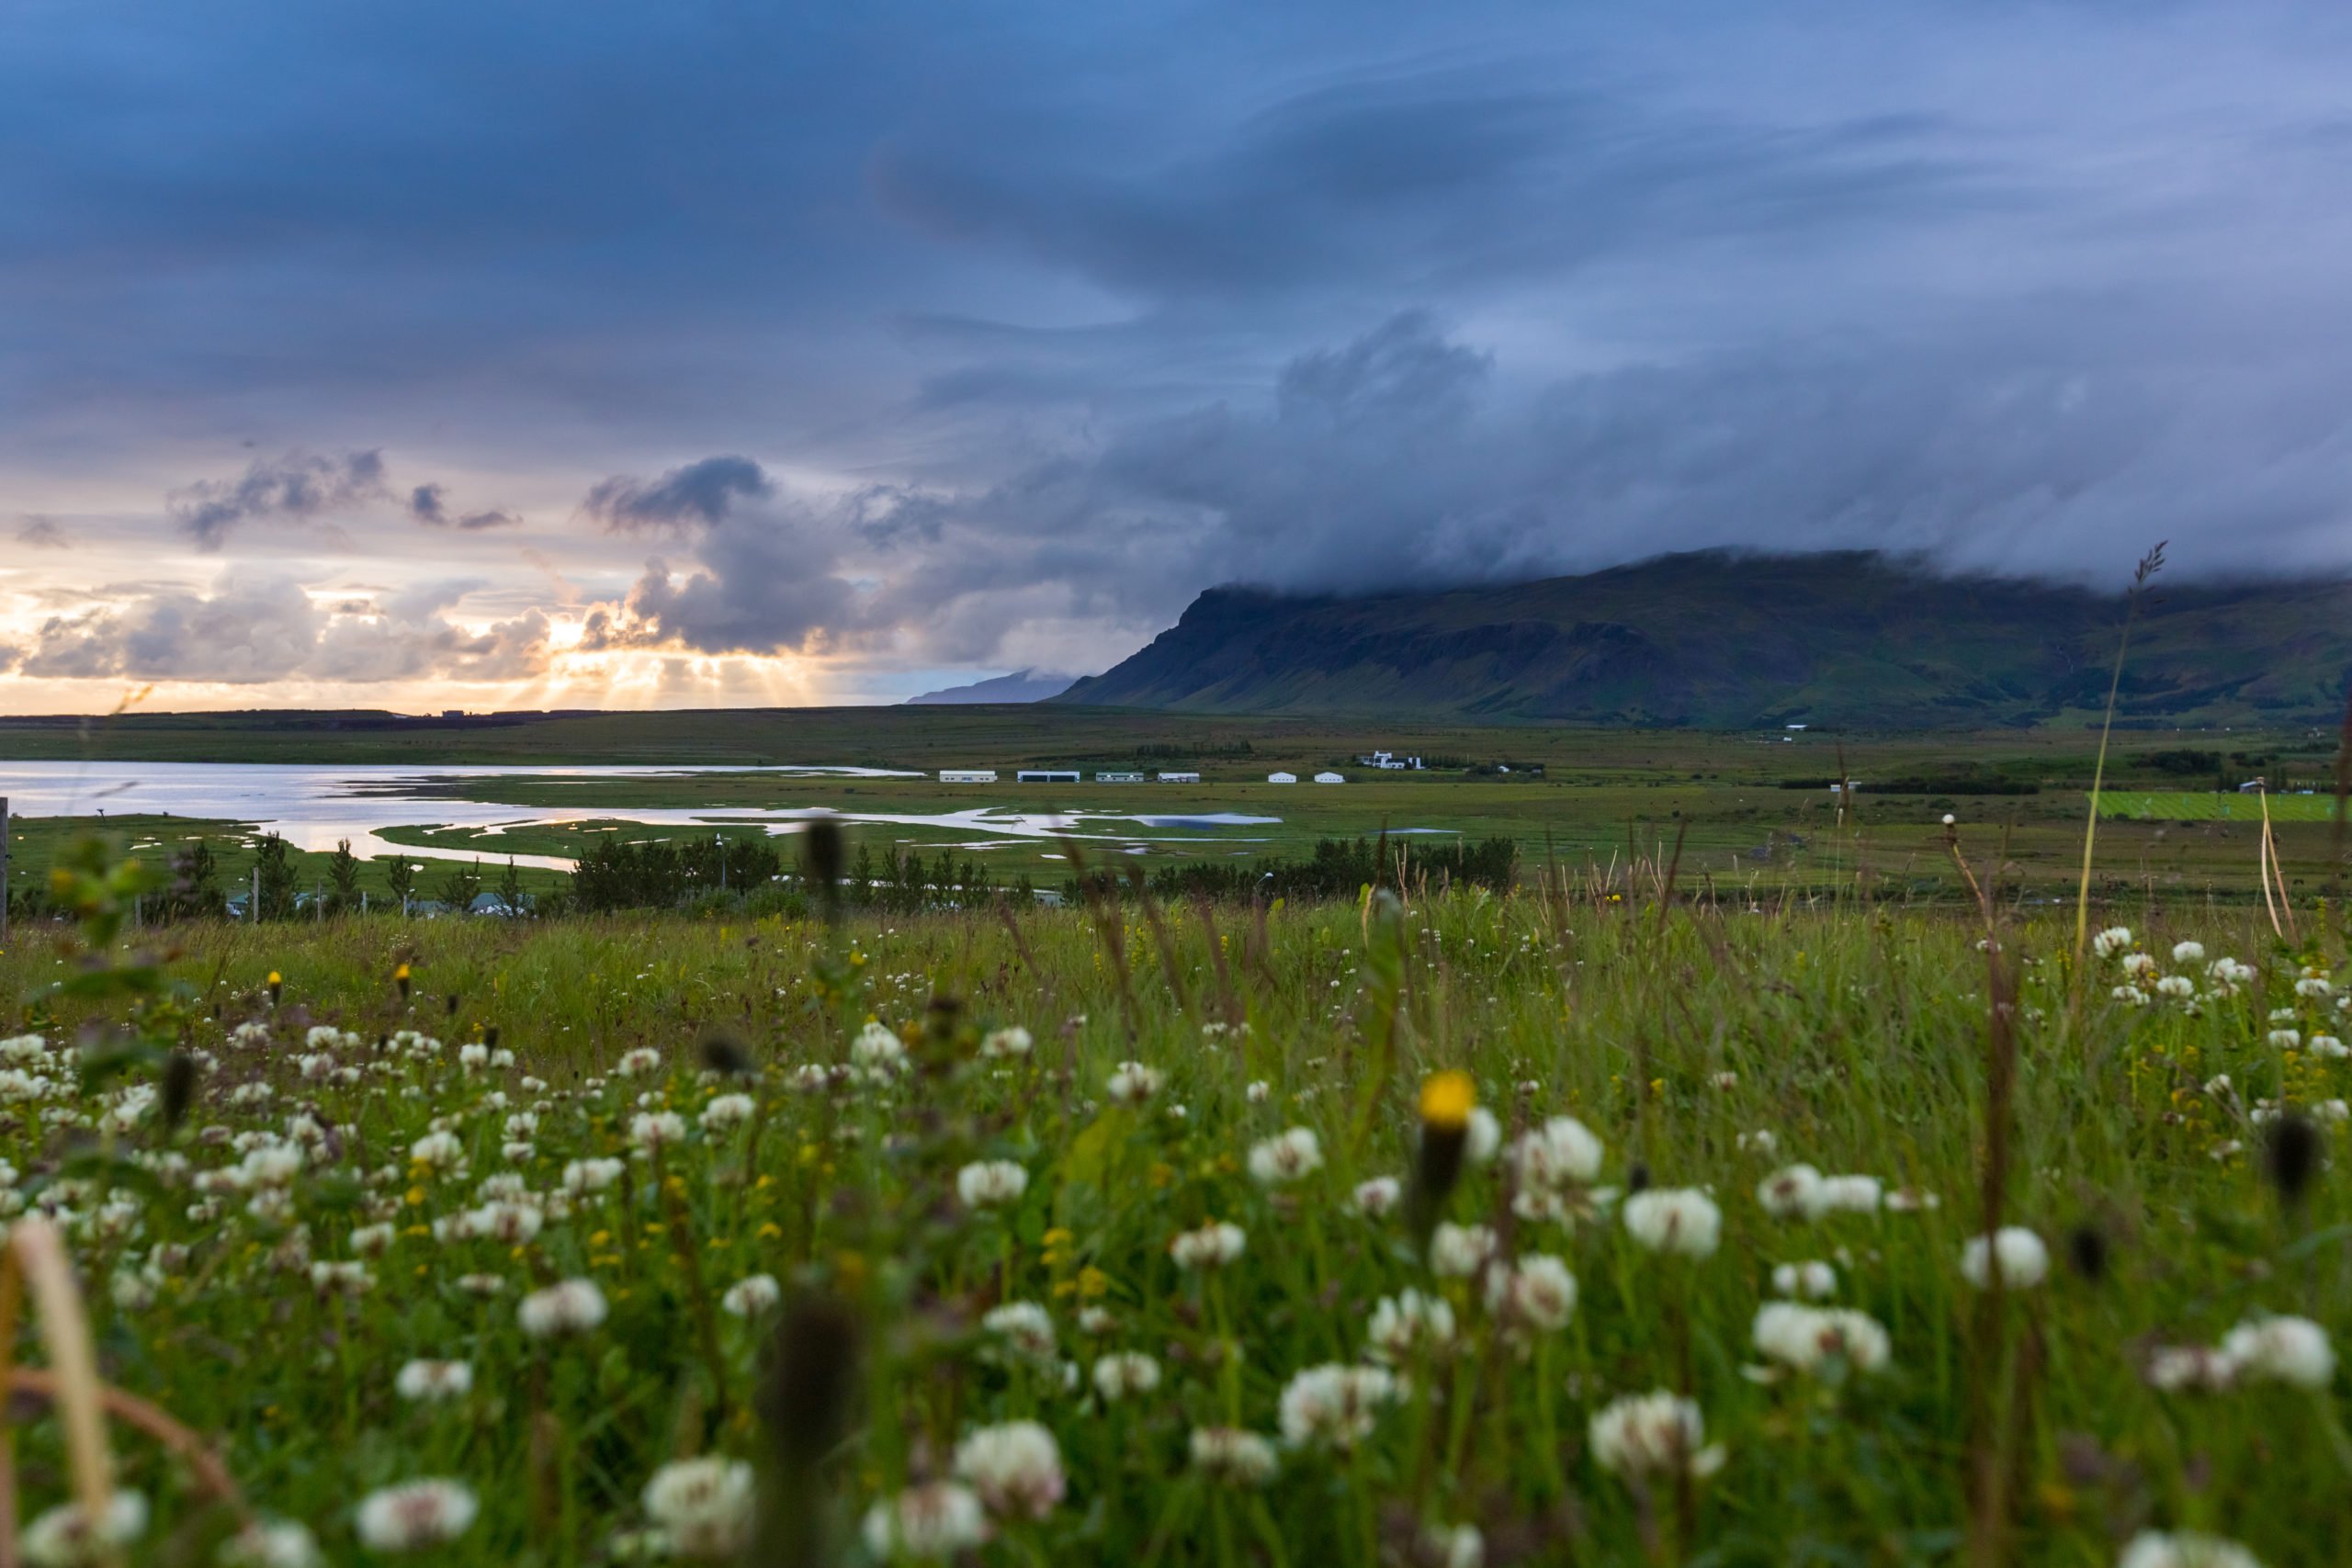 Discover The Mosfellsdalur Valley On Your Buggy Adventure From Reykjavik